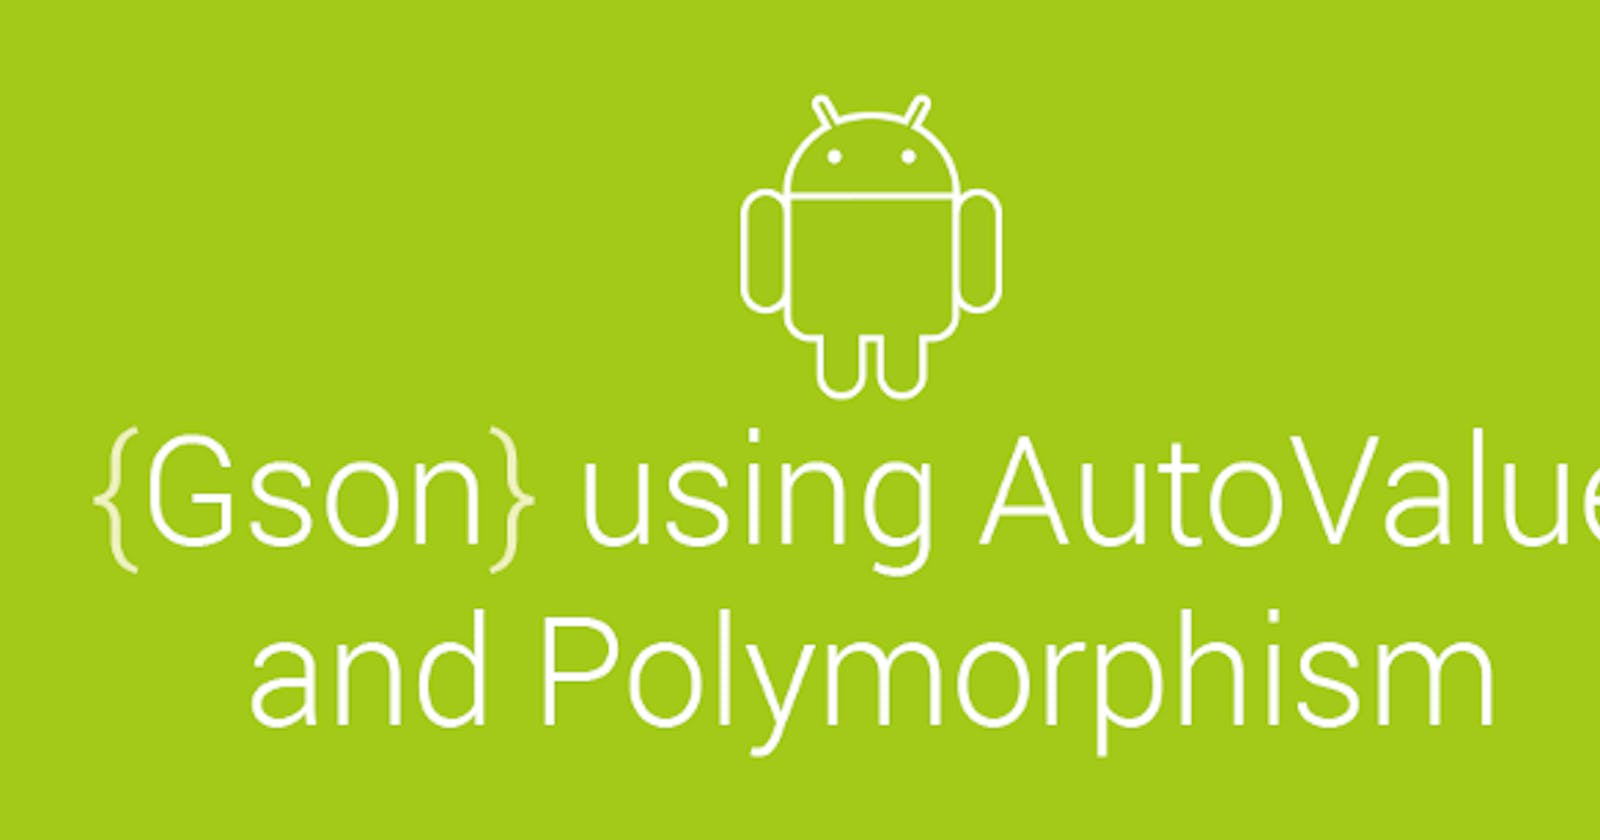 Gson using AutoValue and Polymorphism